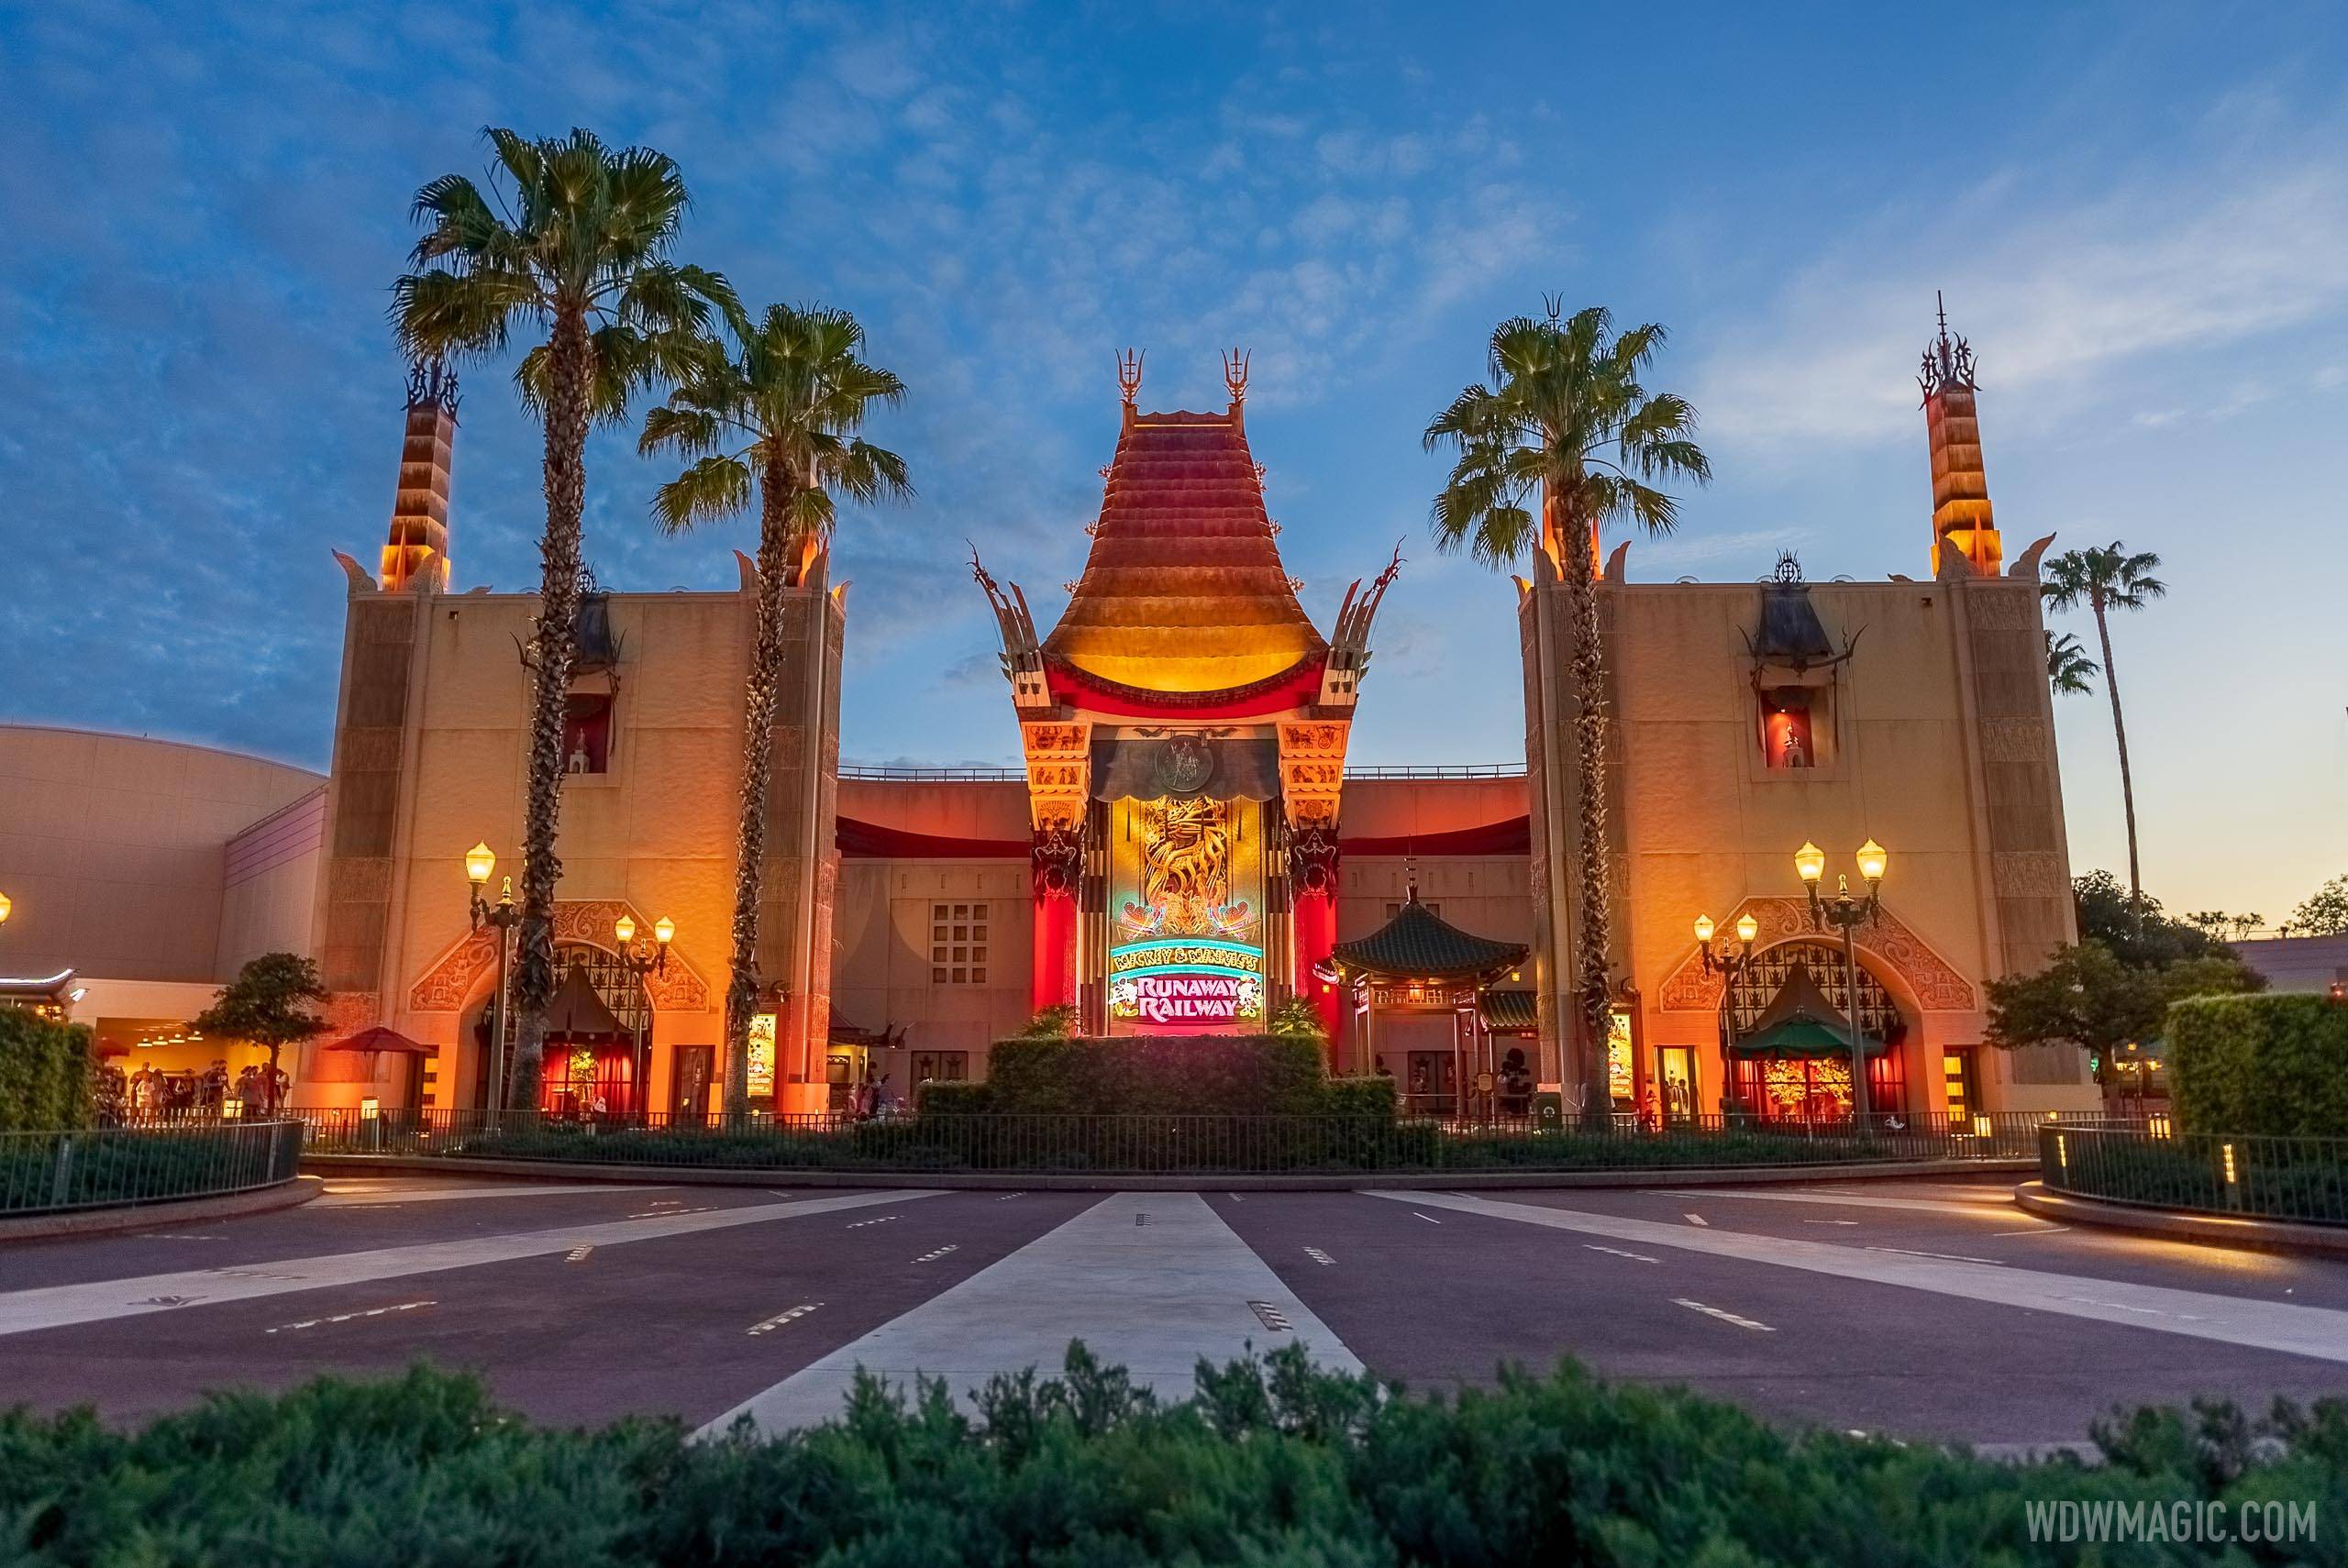 Disney's Hollywood Studios will open as early as 7am in early April